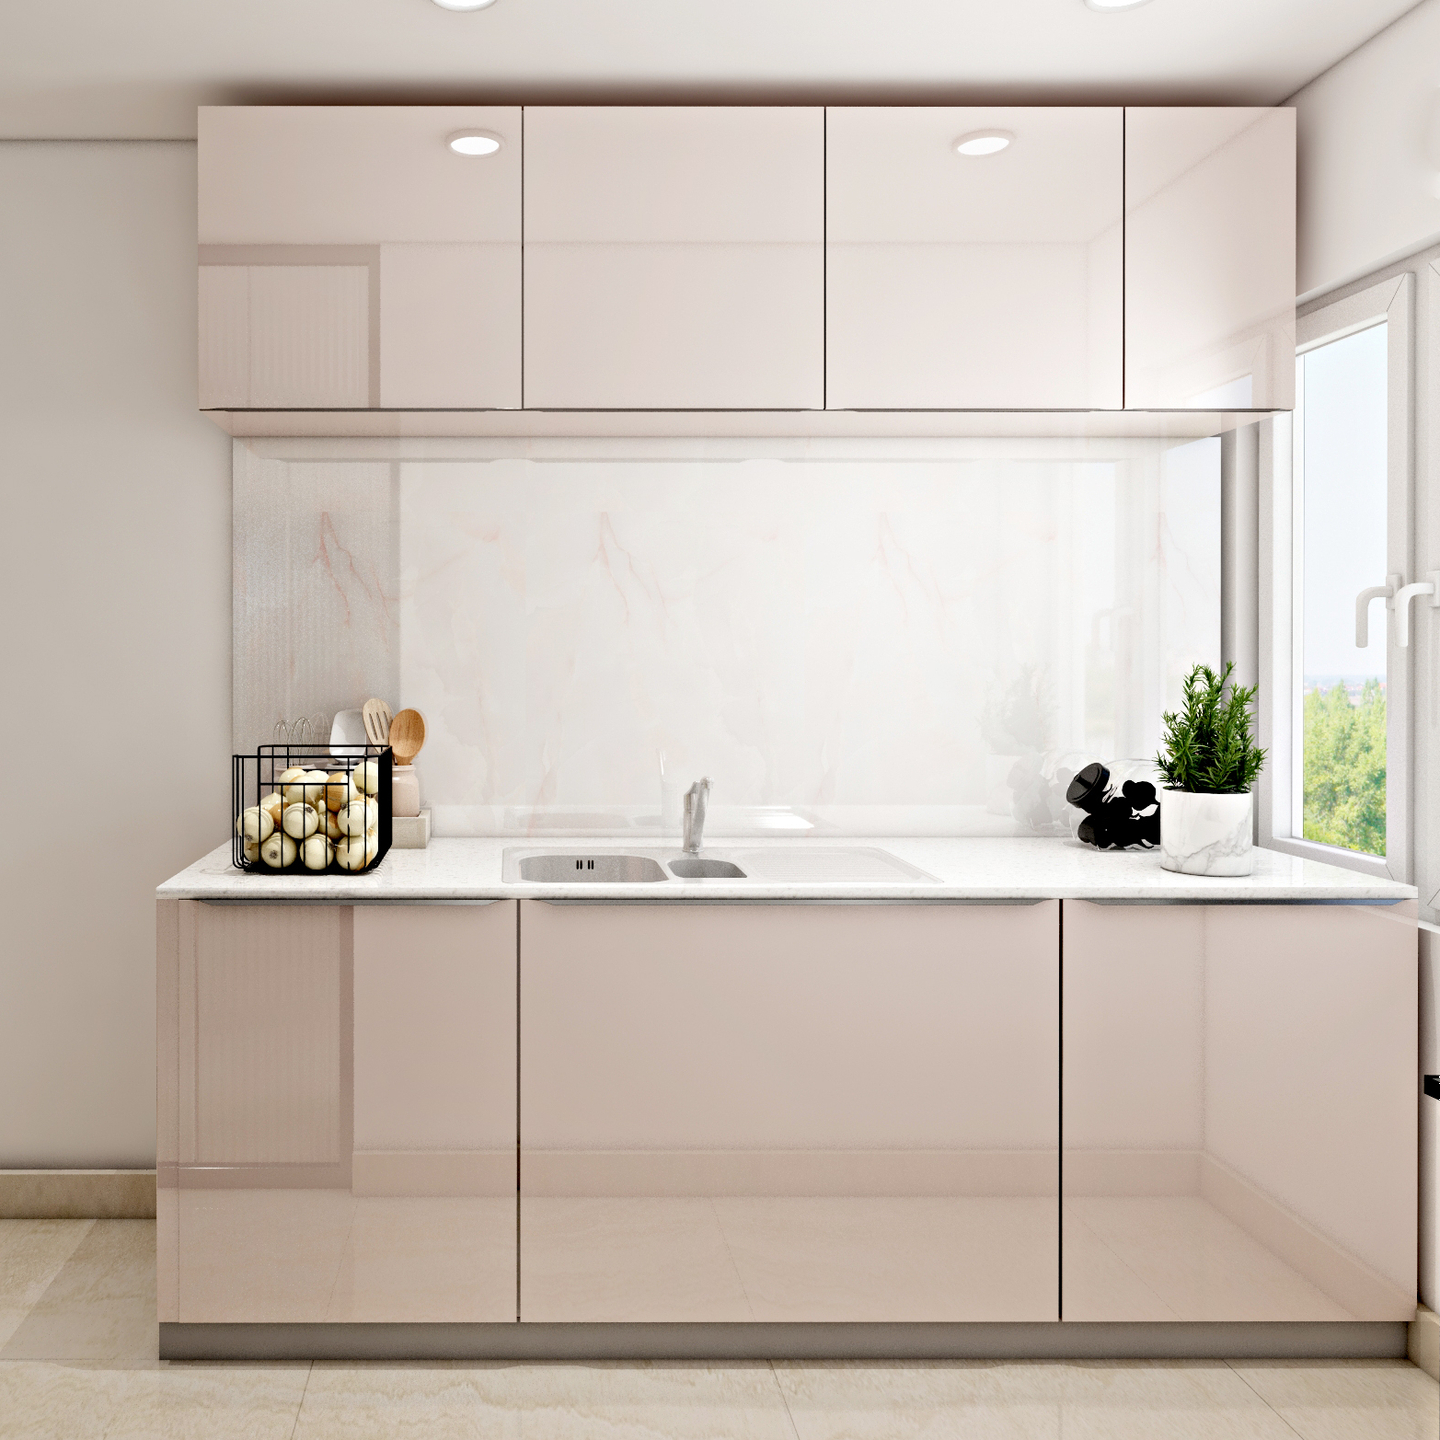 Modern Kitchen Cabinet Design With Light Pink Cabinetry